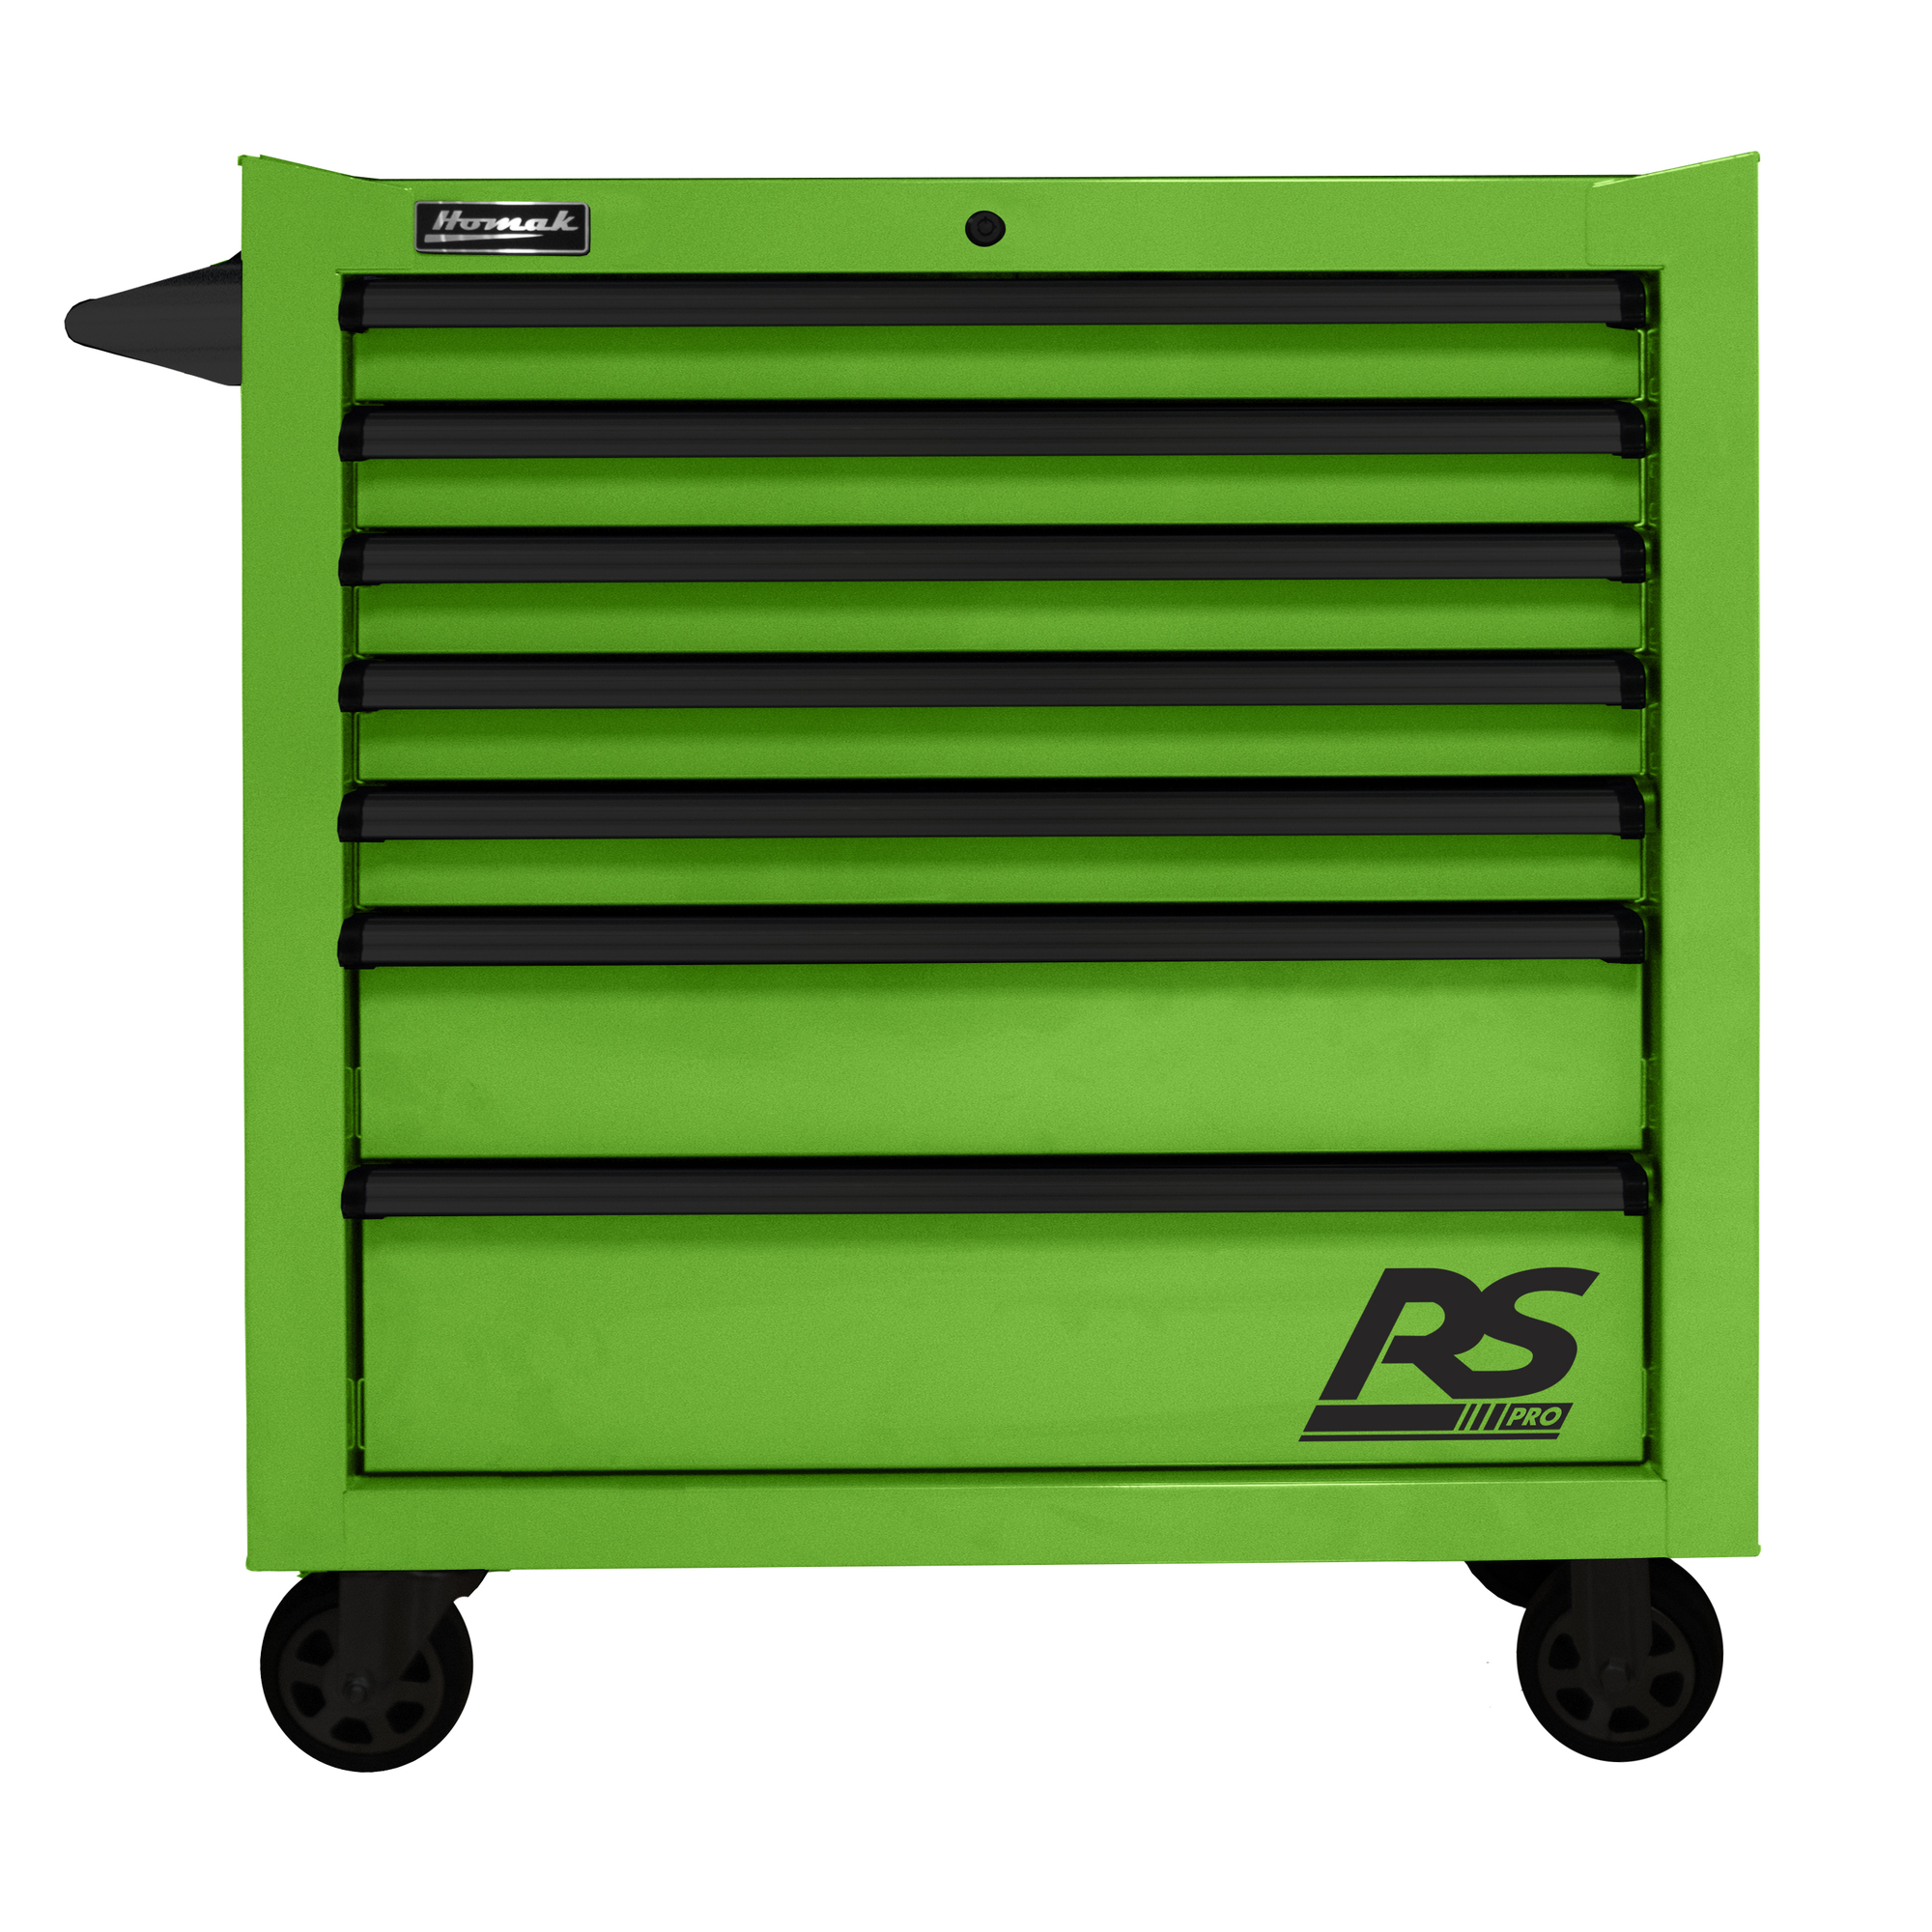 Homak RS Pro, 36Inch RS PRO 7 DWR ROLLING CABINET-LIME GREEN, Width 39 in, Height 36 in, Color Green, Model LG04036070